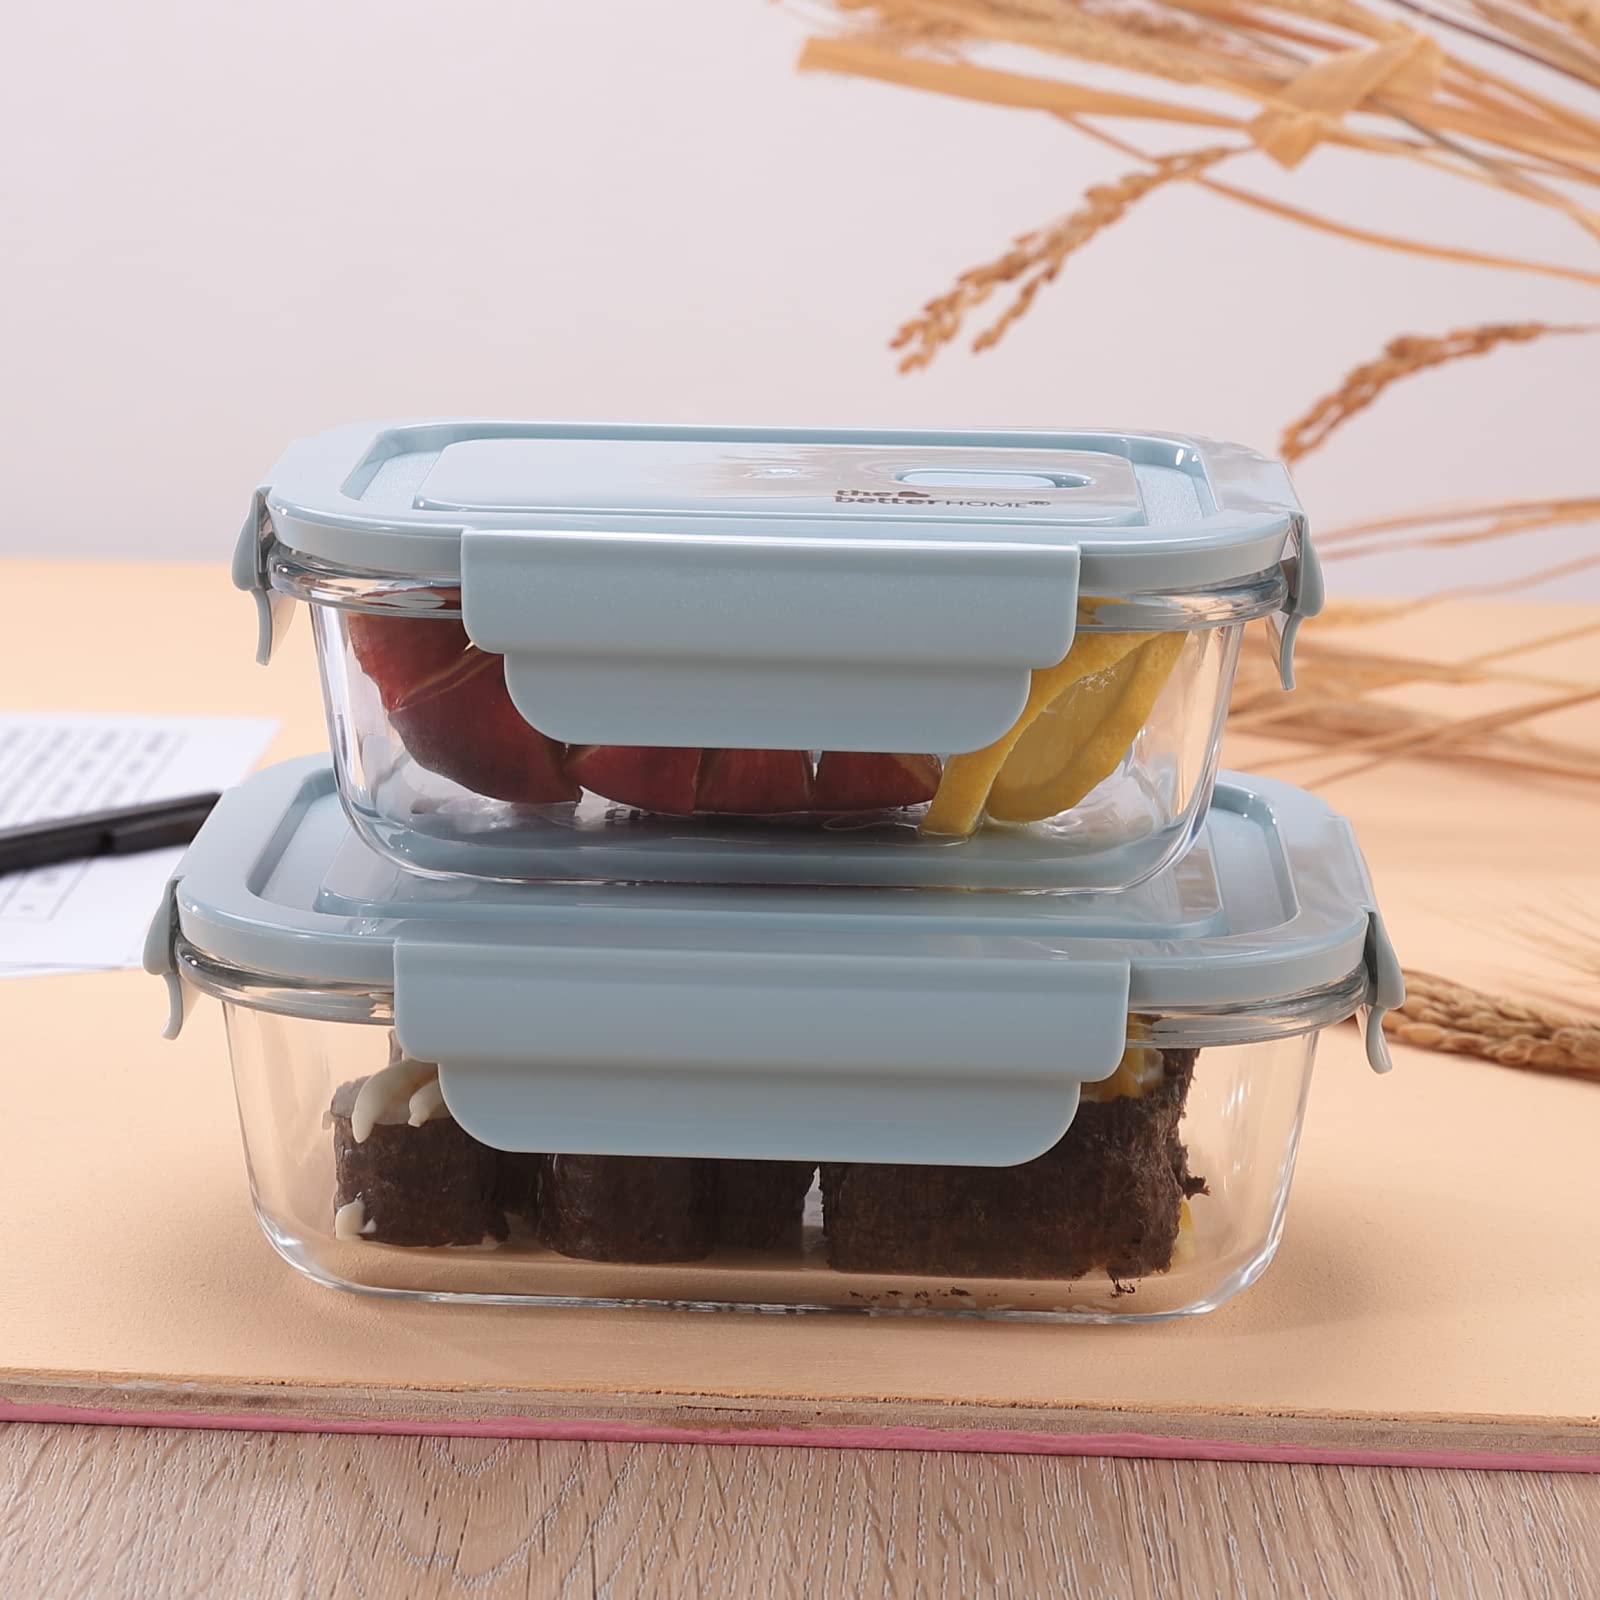 Glass Tupperware Set  Food Storage Containers